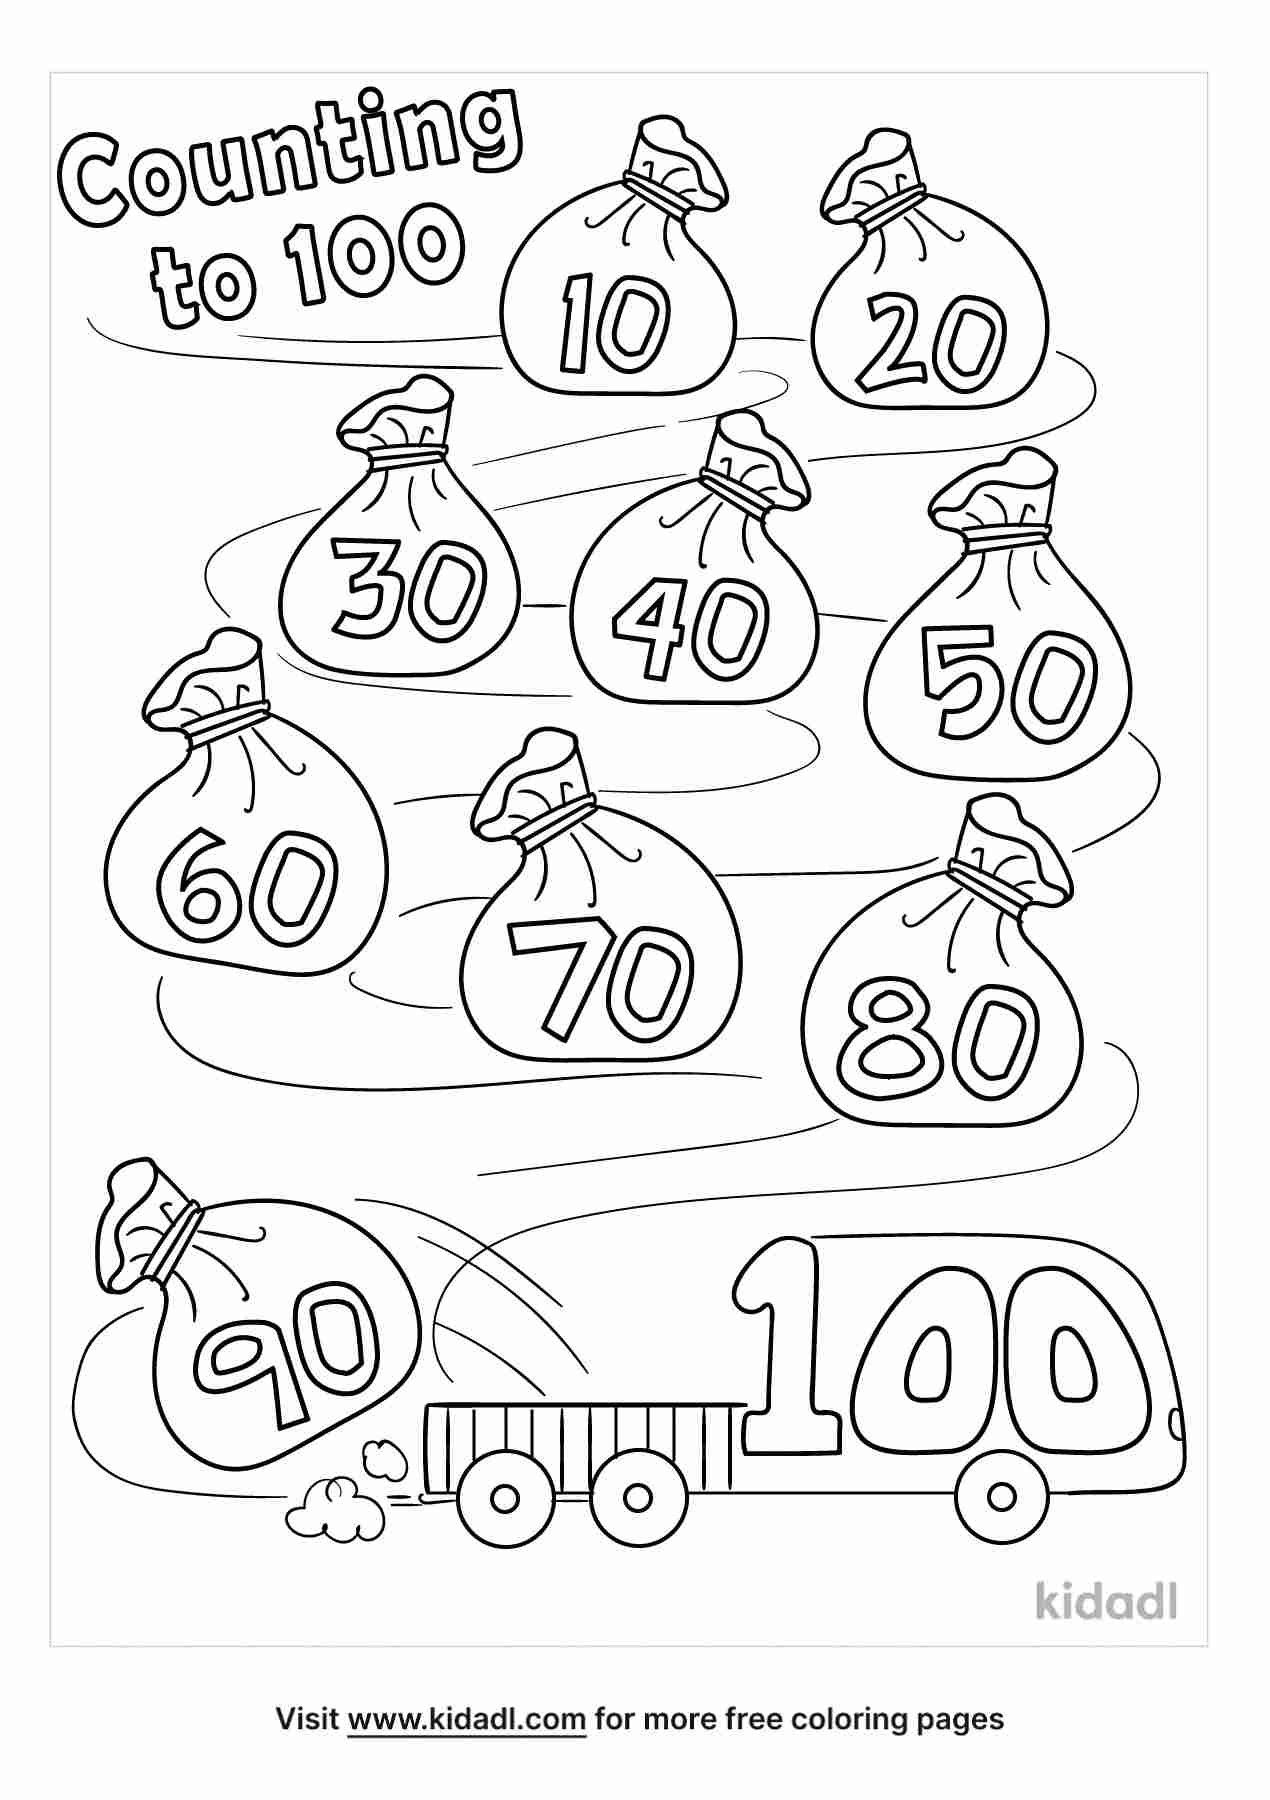 Counting to hundred coloring page for kids.